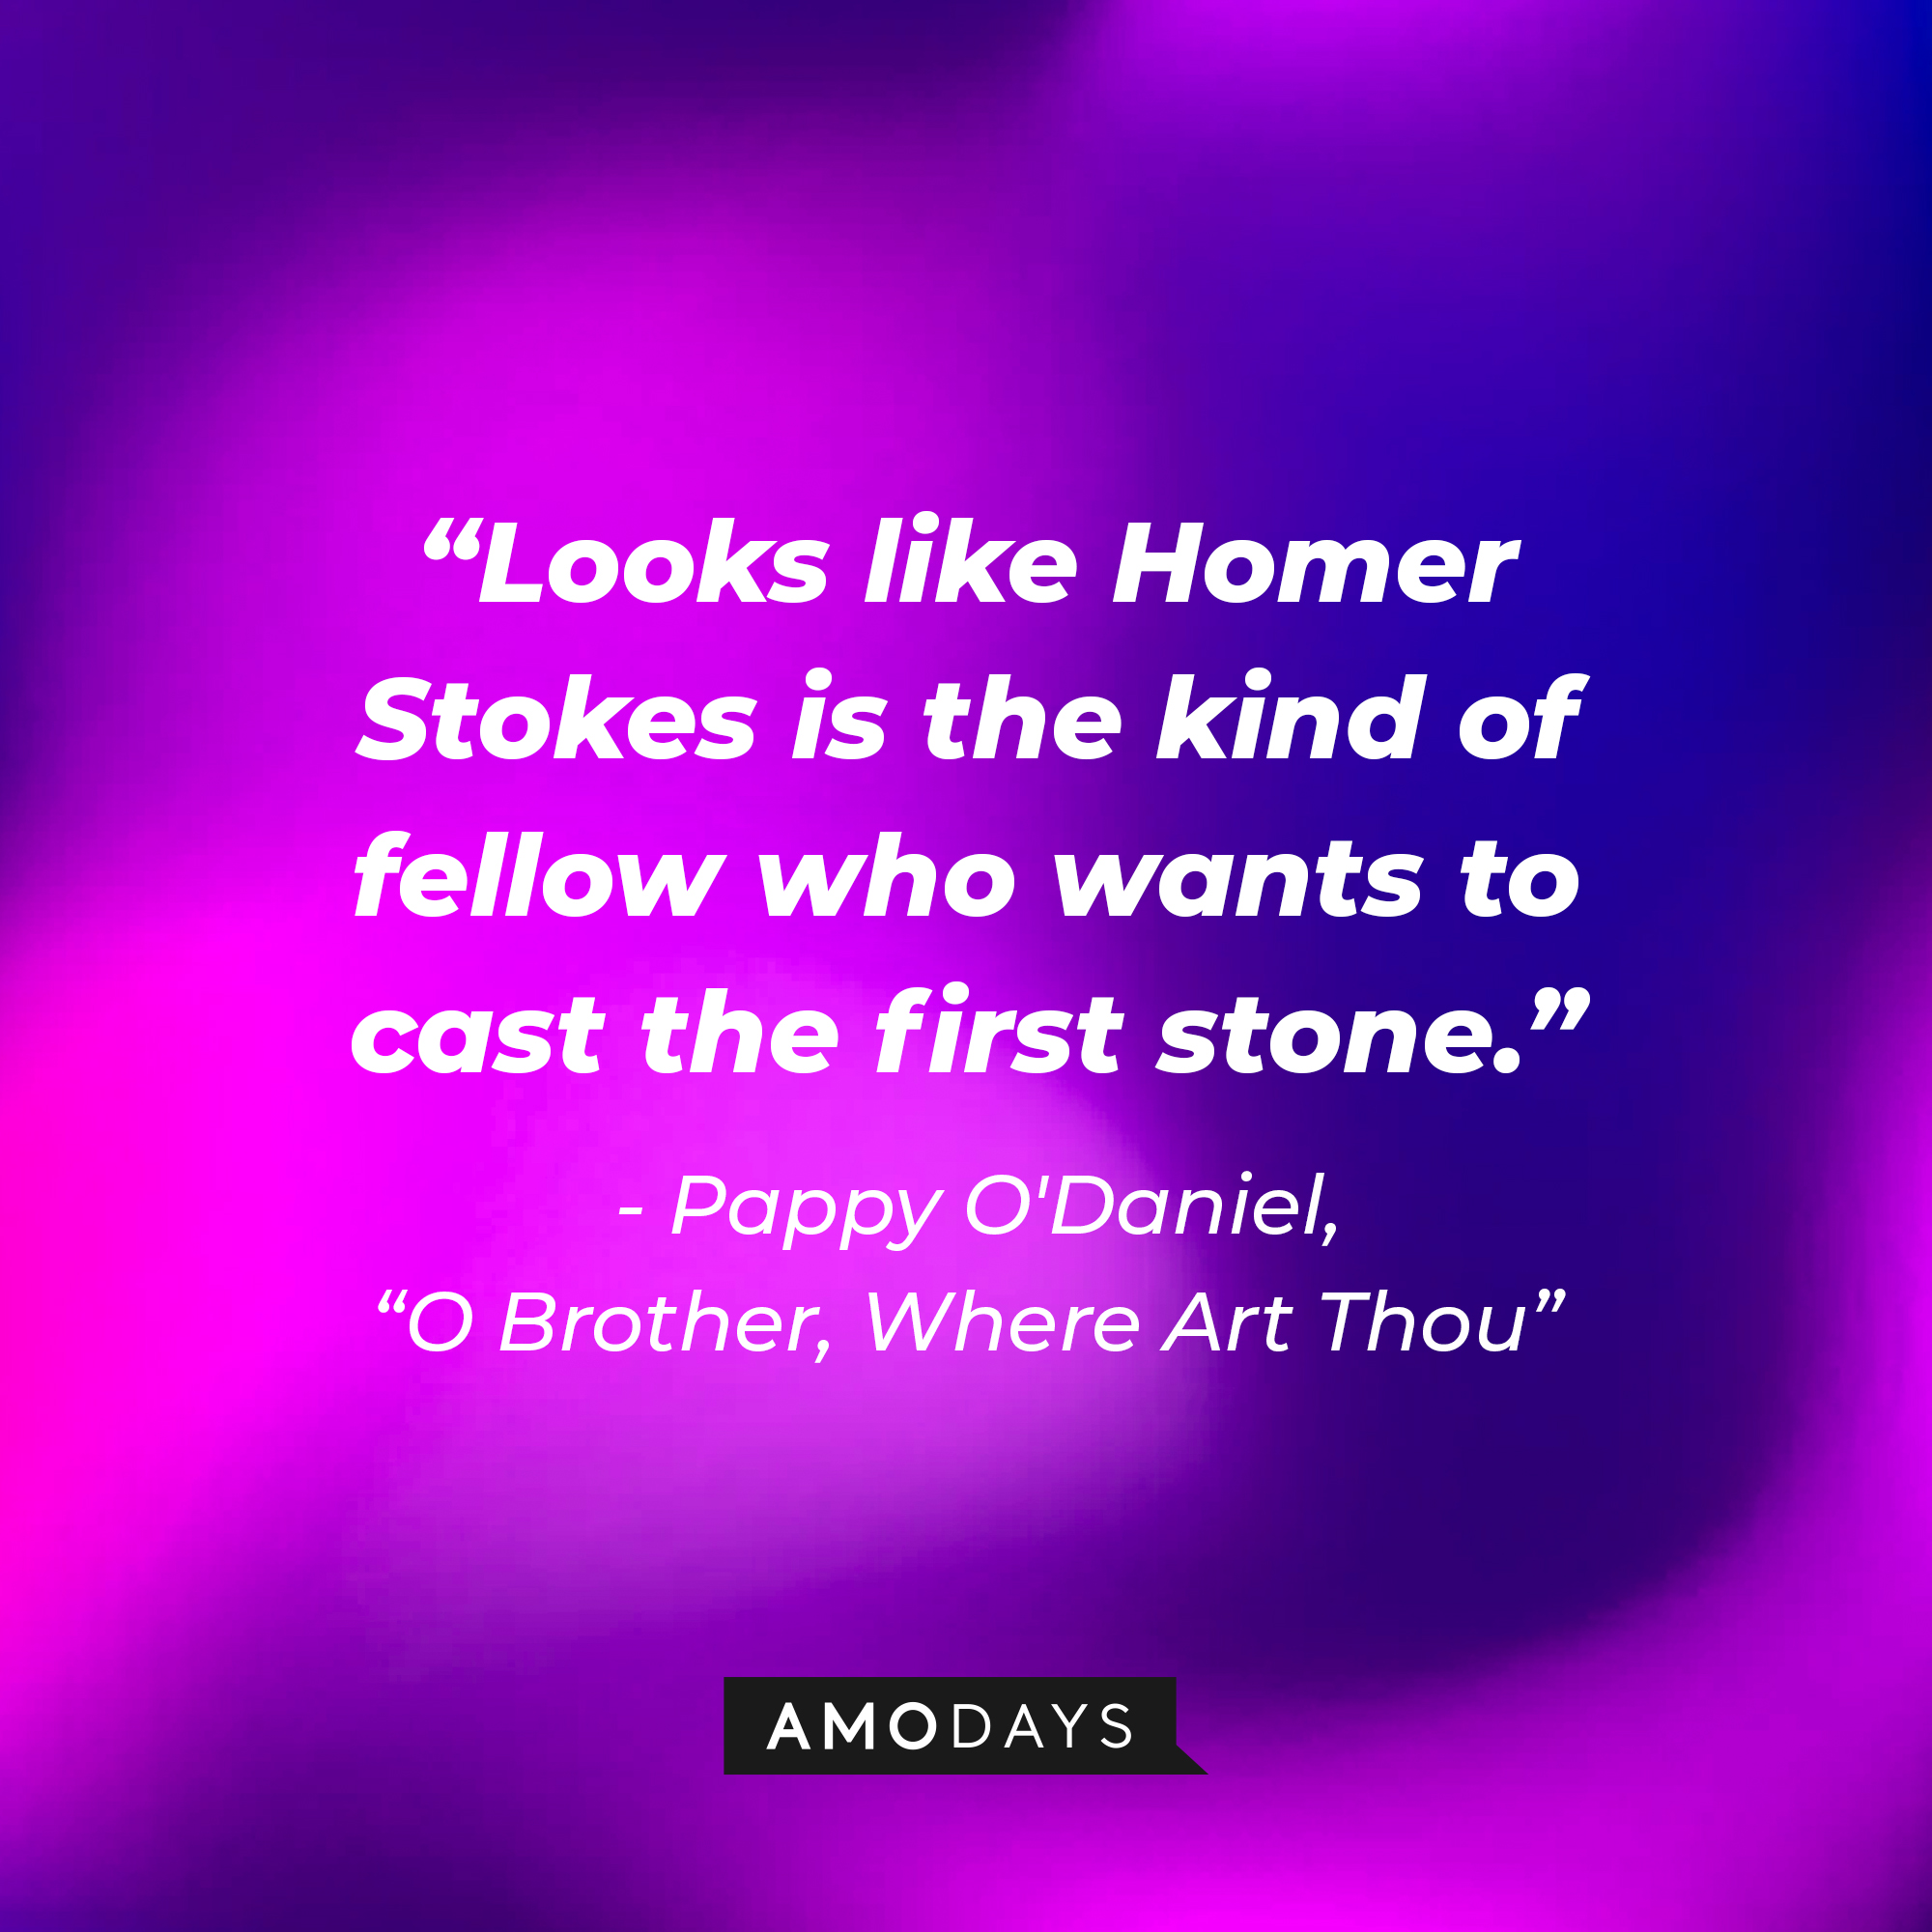 Pappy O'Daniel's quote in "O Brother, Where Art Thou:" "Looks like Homer Stokes is the kind of fellow who wants to cast the first stone." | Source: AmoDays